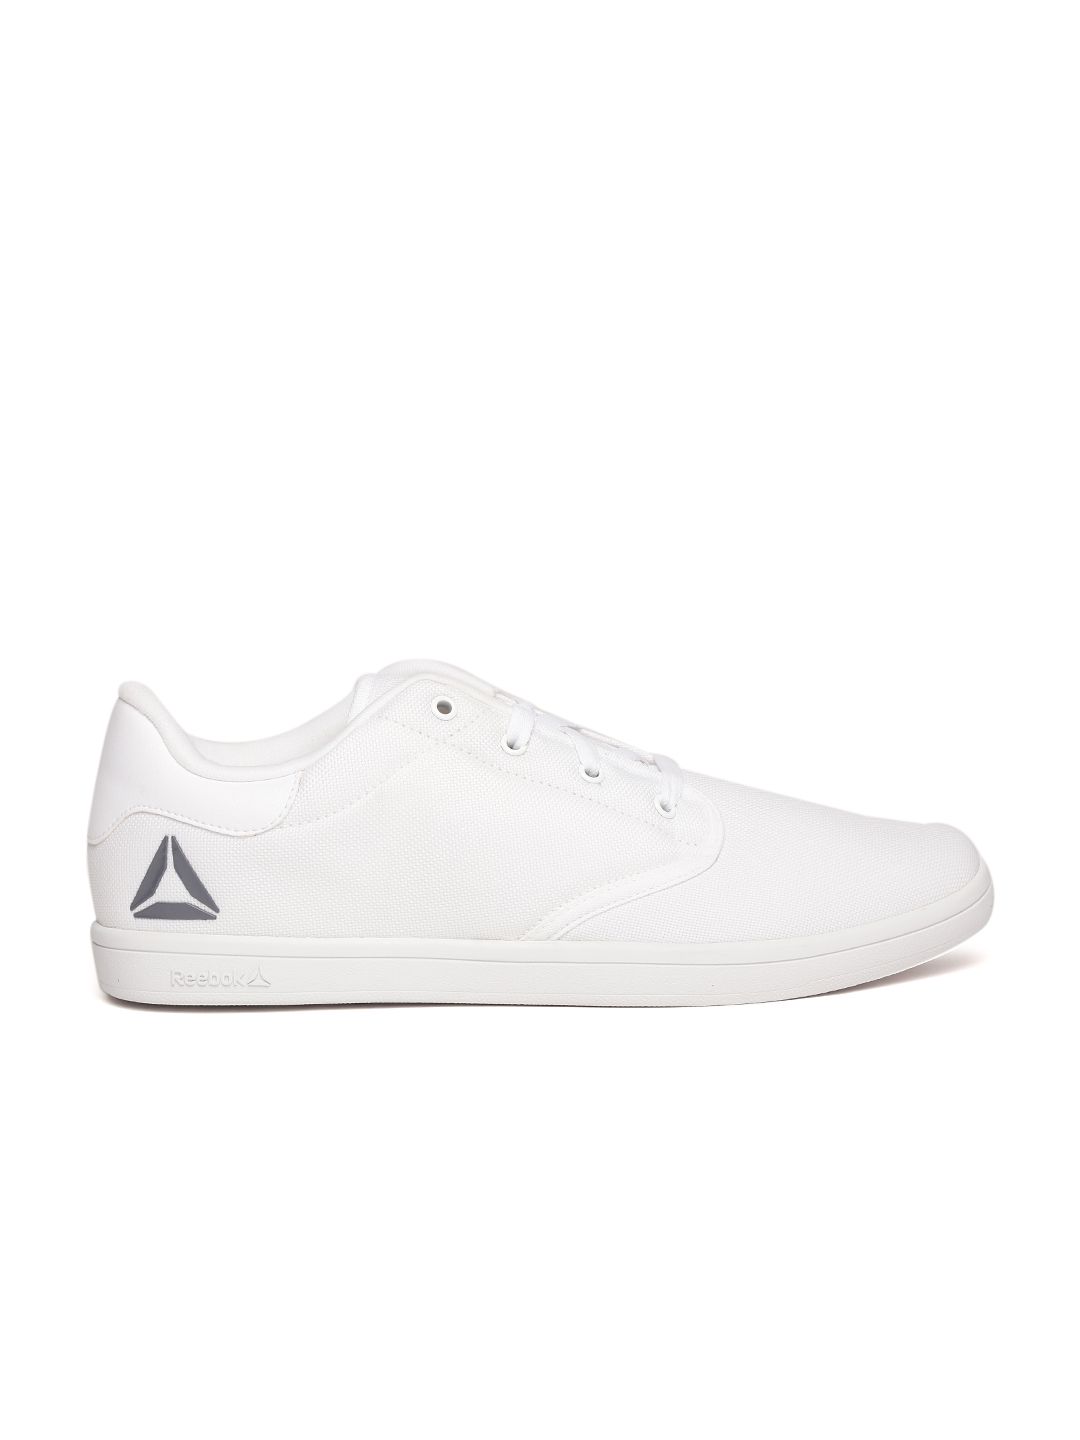 reebok shoes mens snapdeal